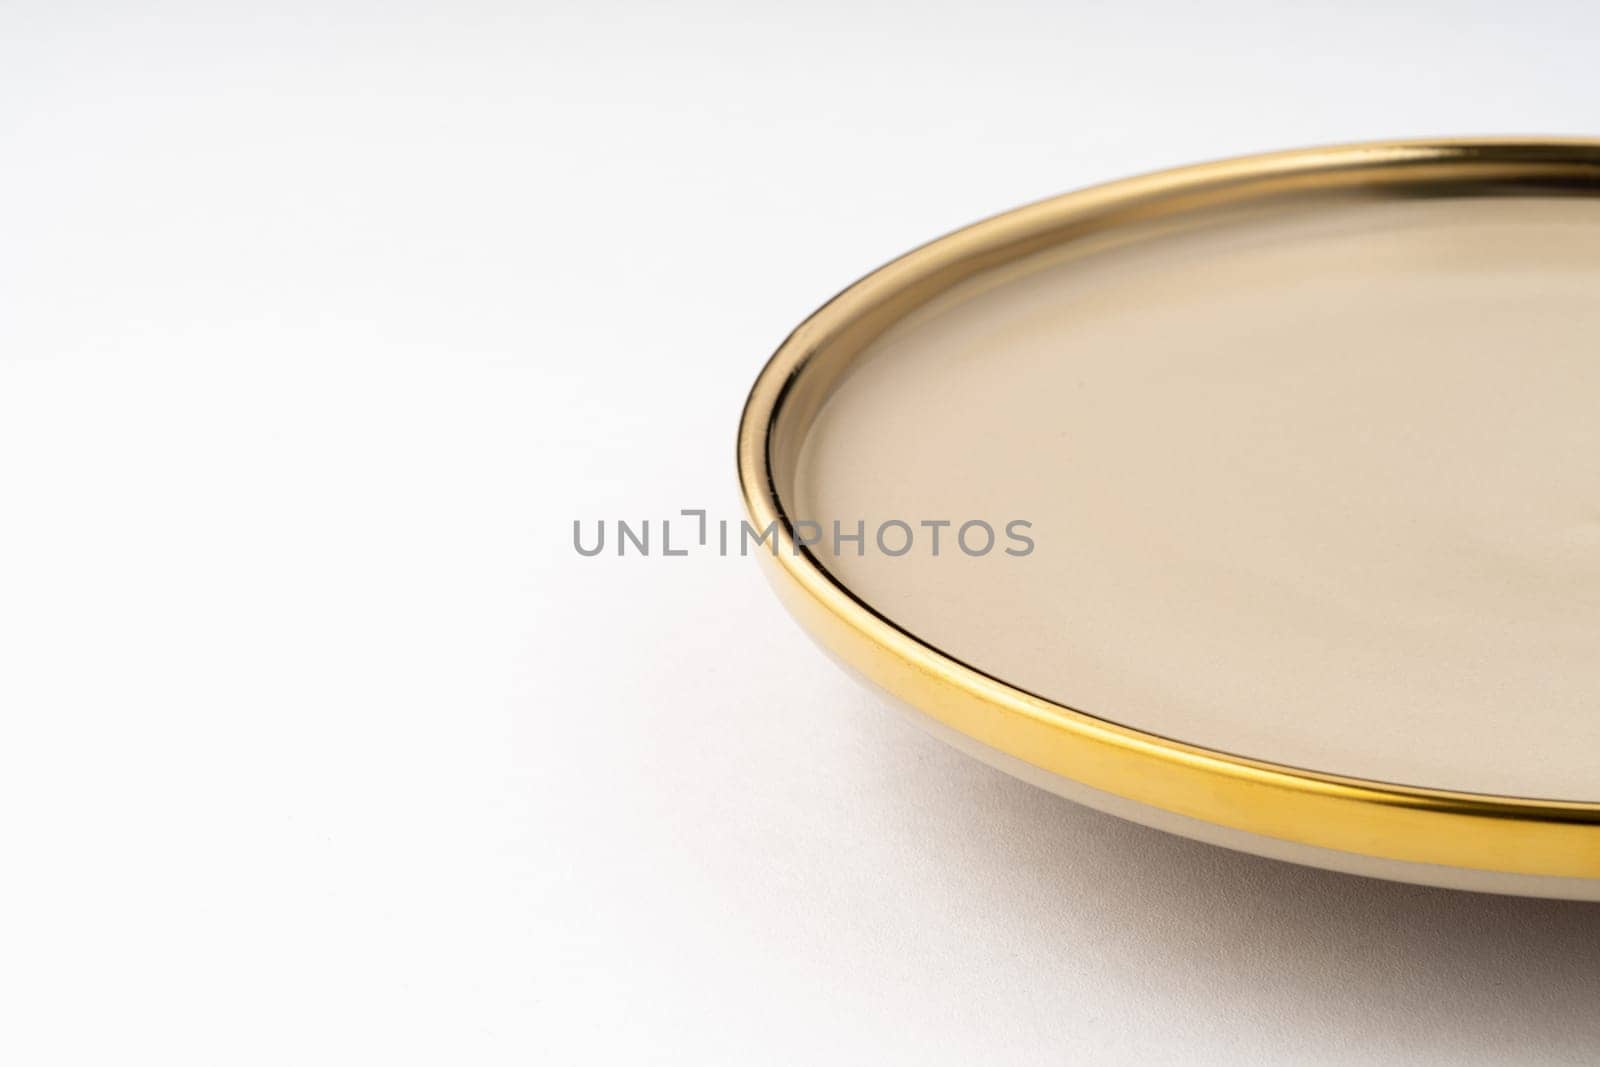 A light brown ceramic plate on a white background. Close-up